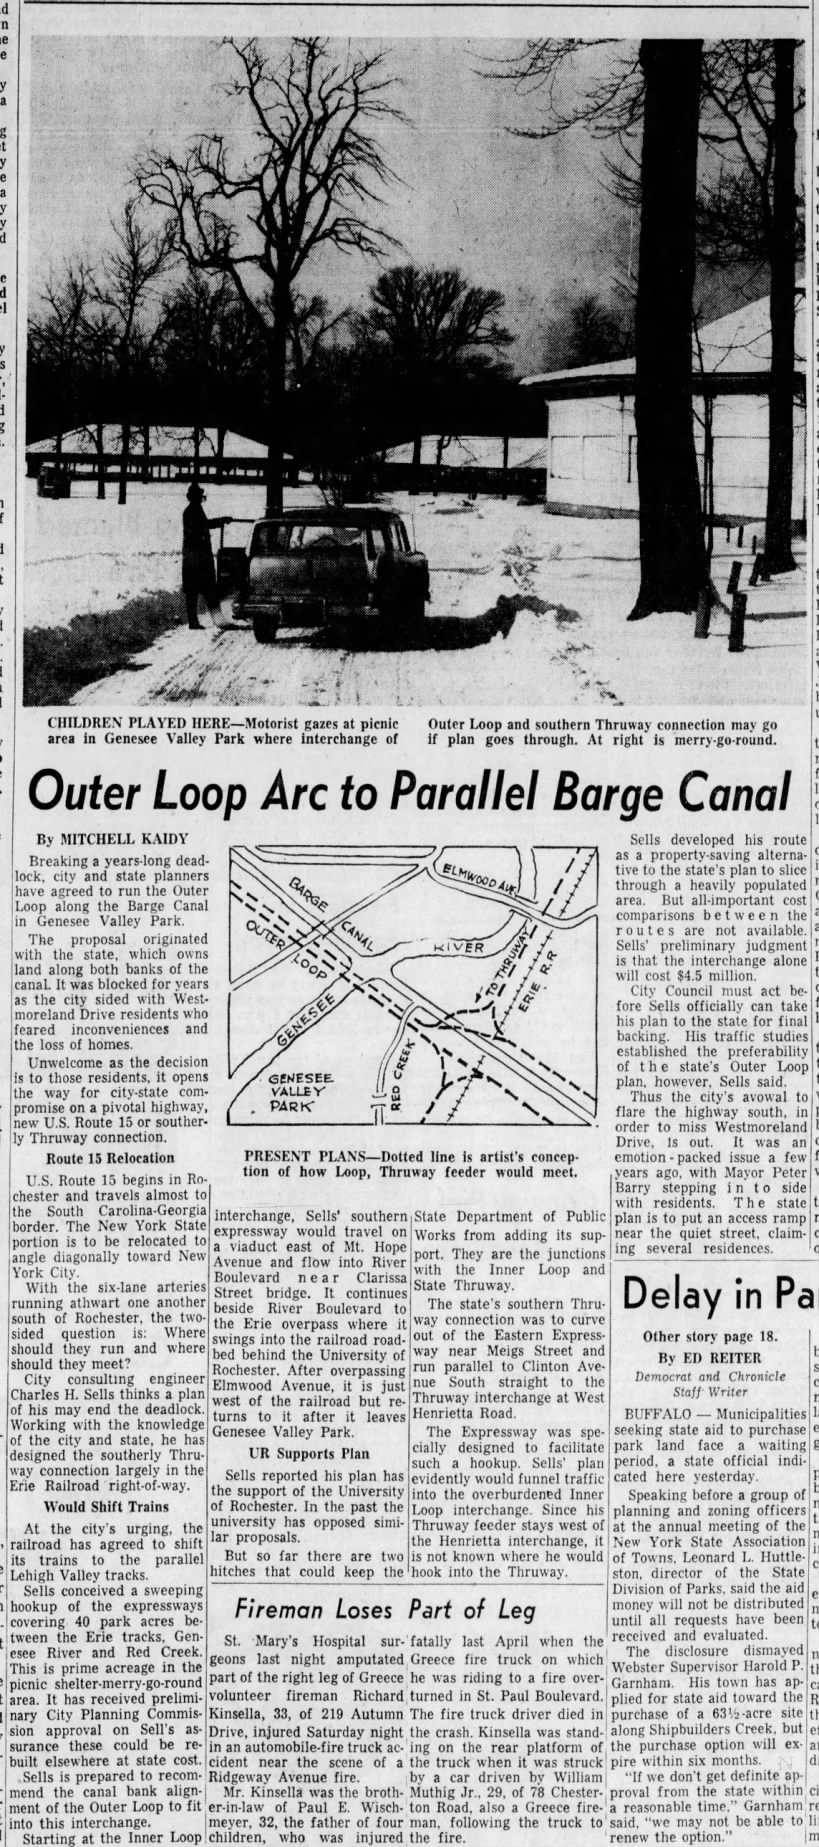 Outer Loop Arc to Parallel Barge Canal,